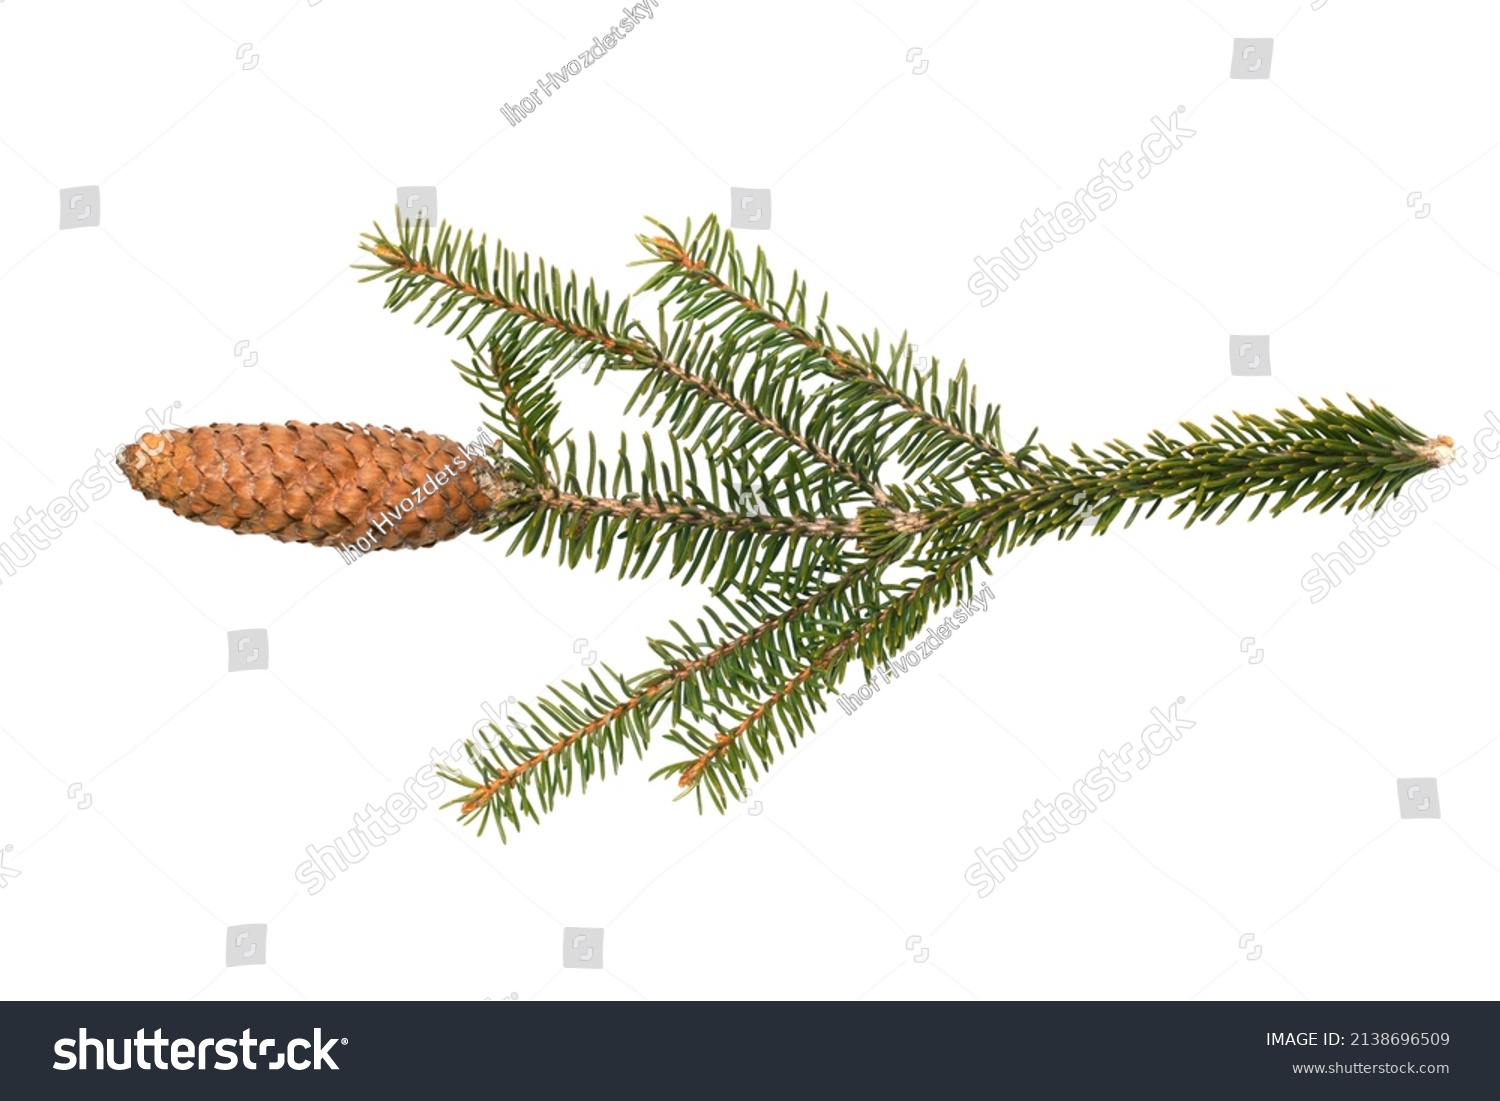 Cone with a branch of European spruce (Picea abies) isolated on a white background, clipping path, no shadows. Botanical illustration of European spruce. #2138696509